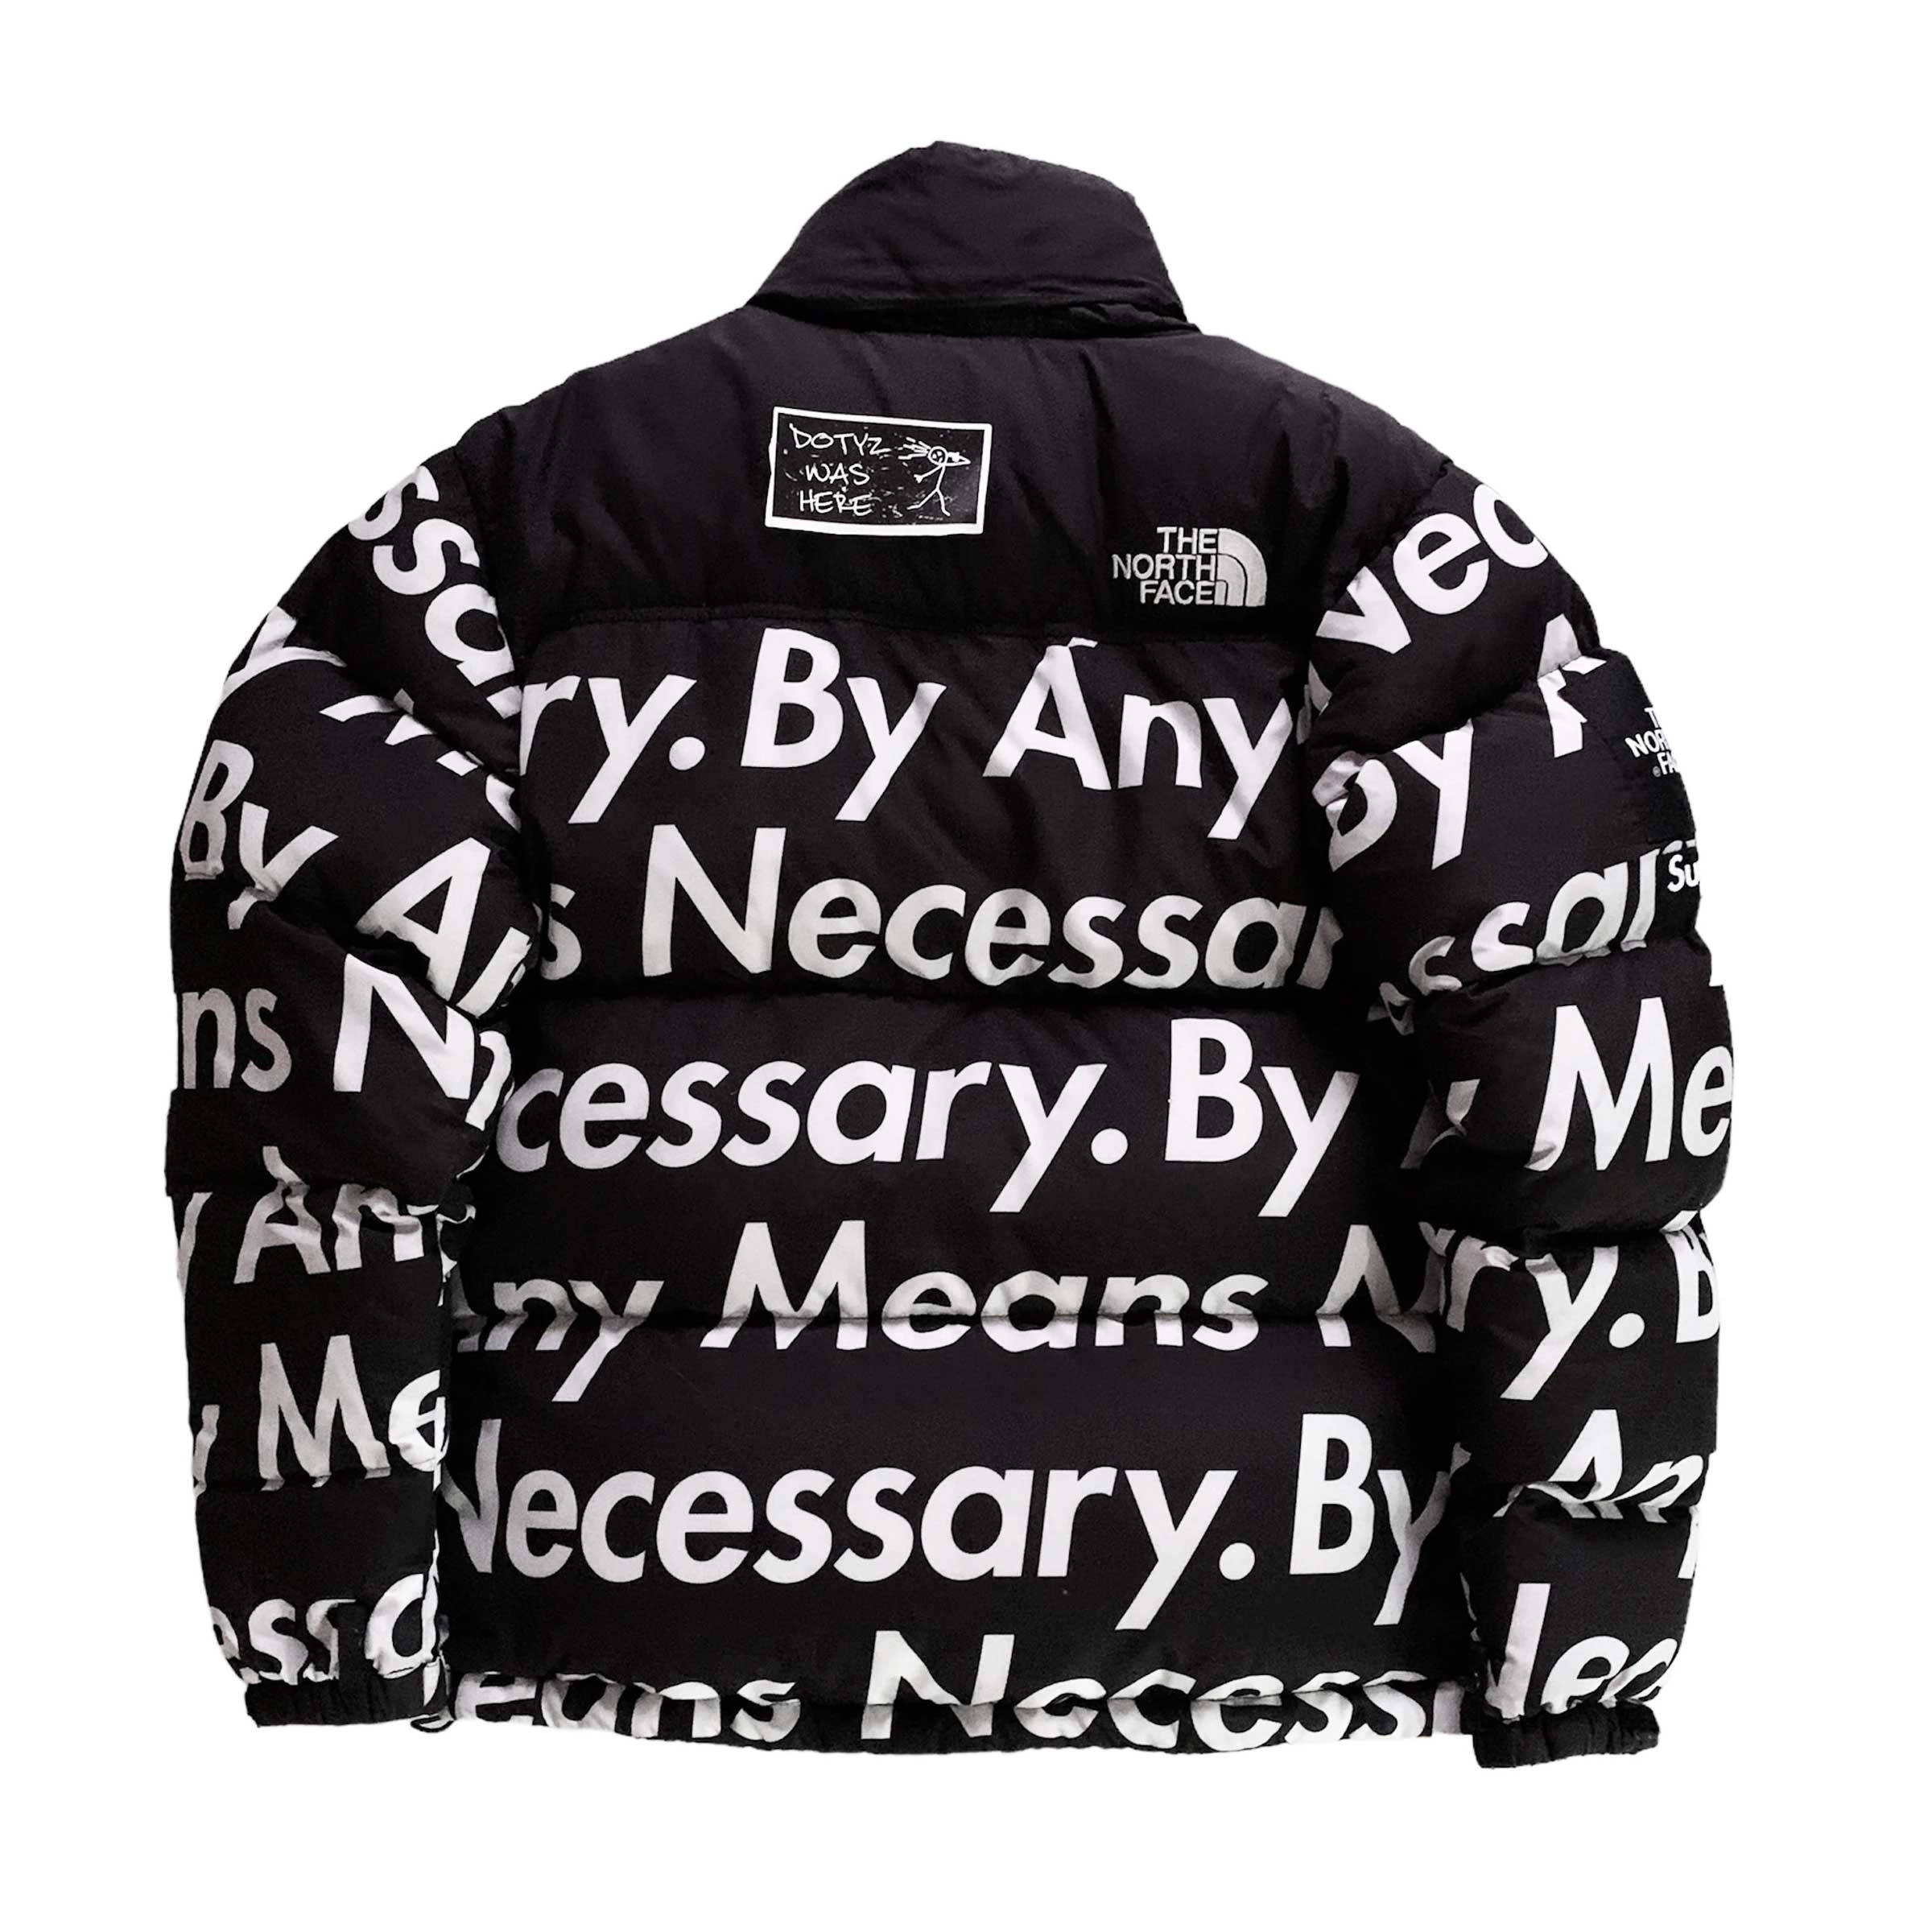 By Any Means Necessary Jacket - A2 Jackets